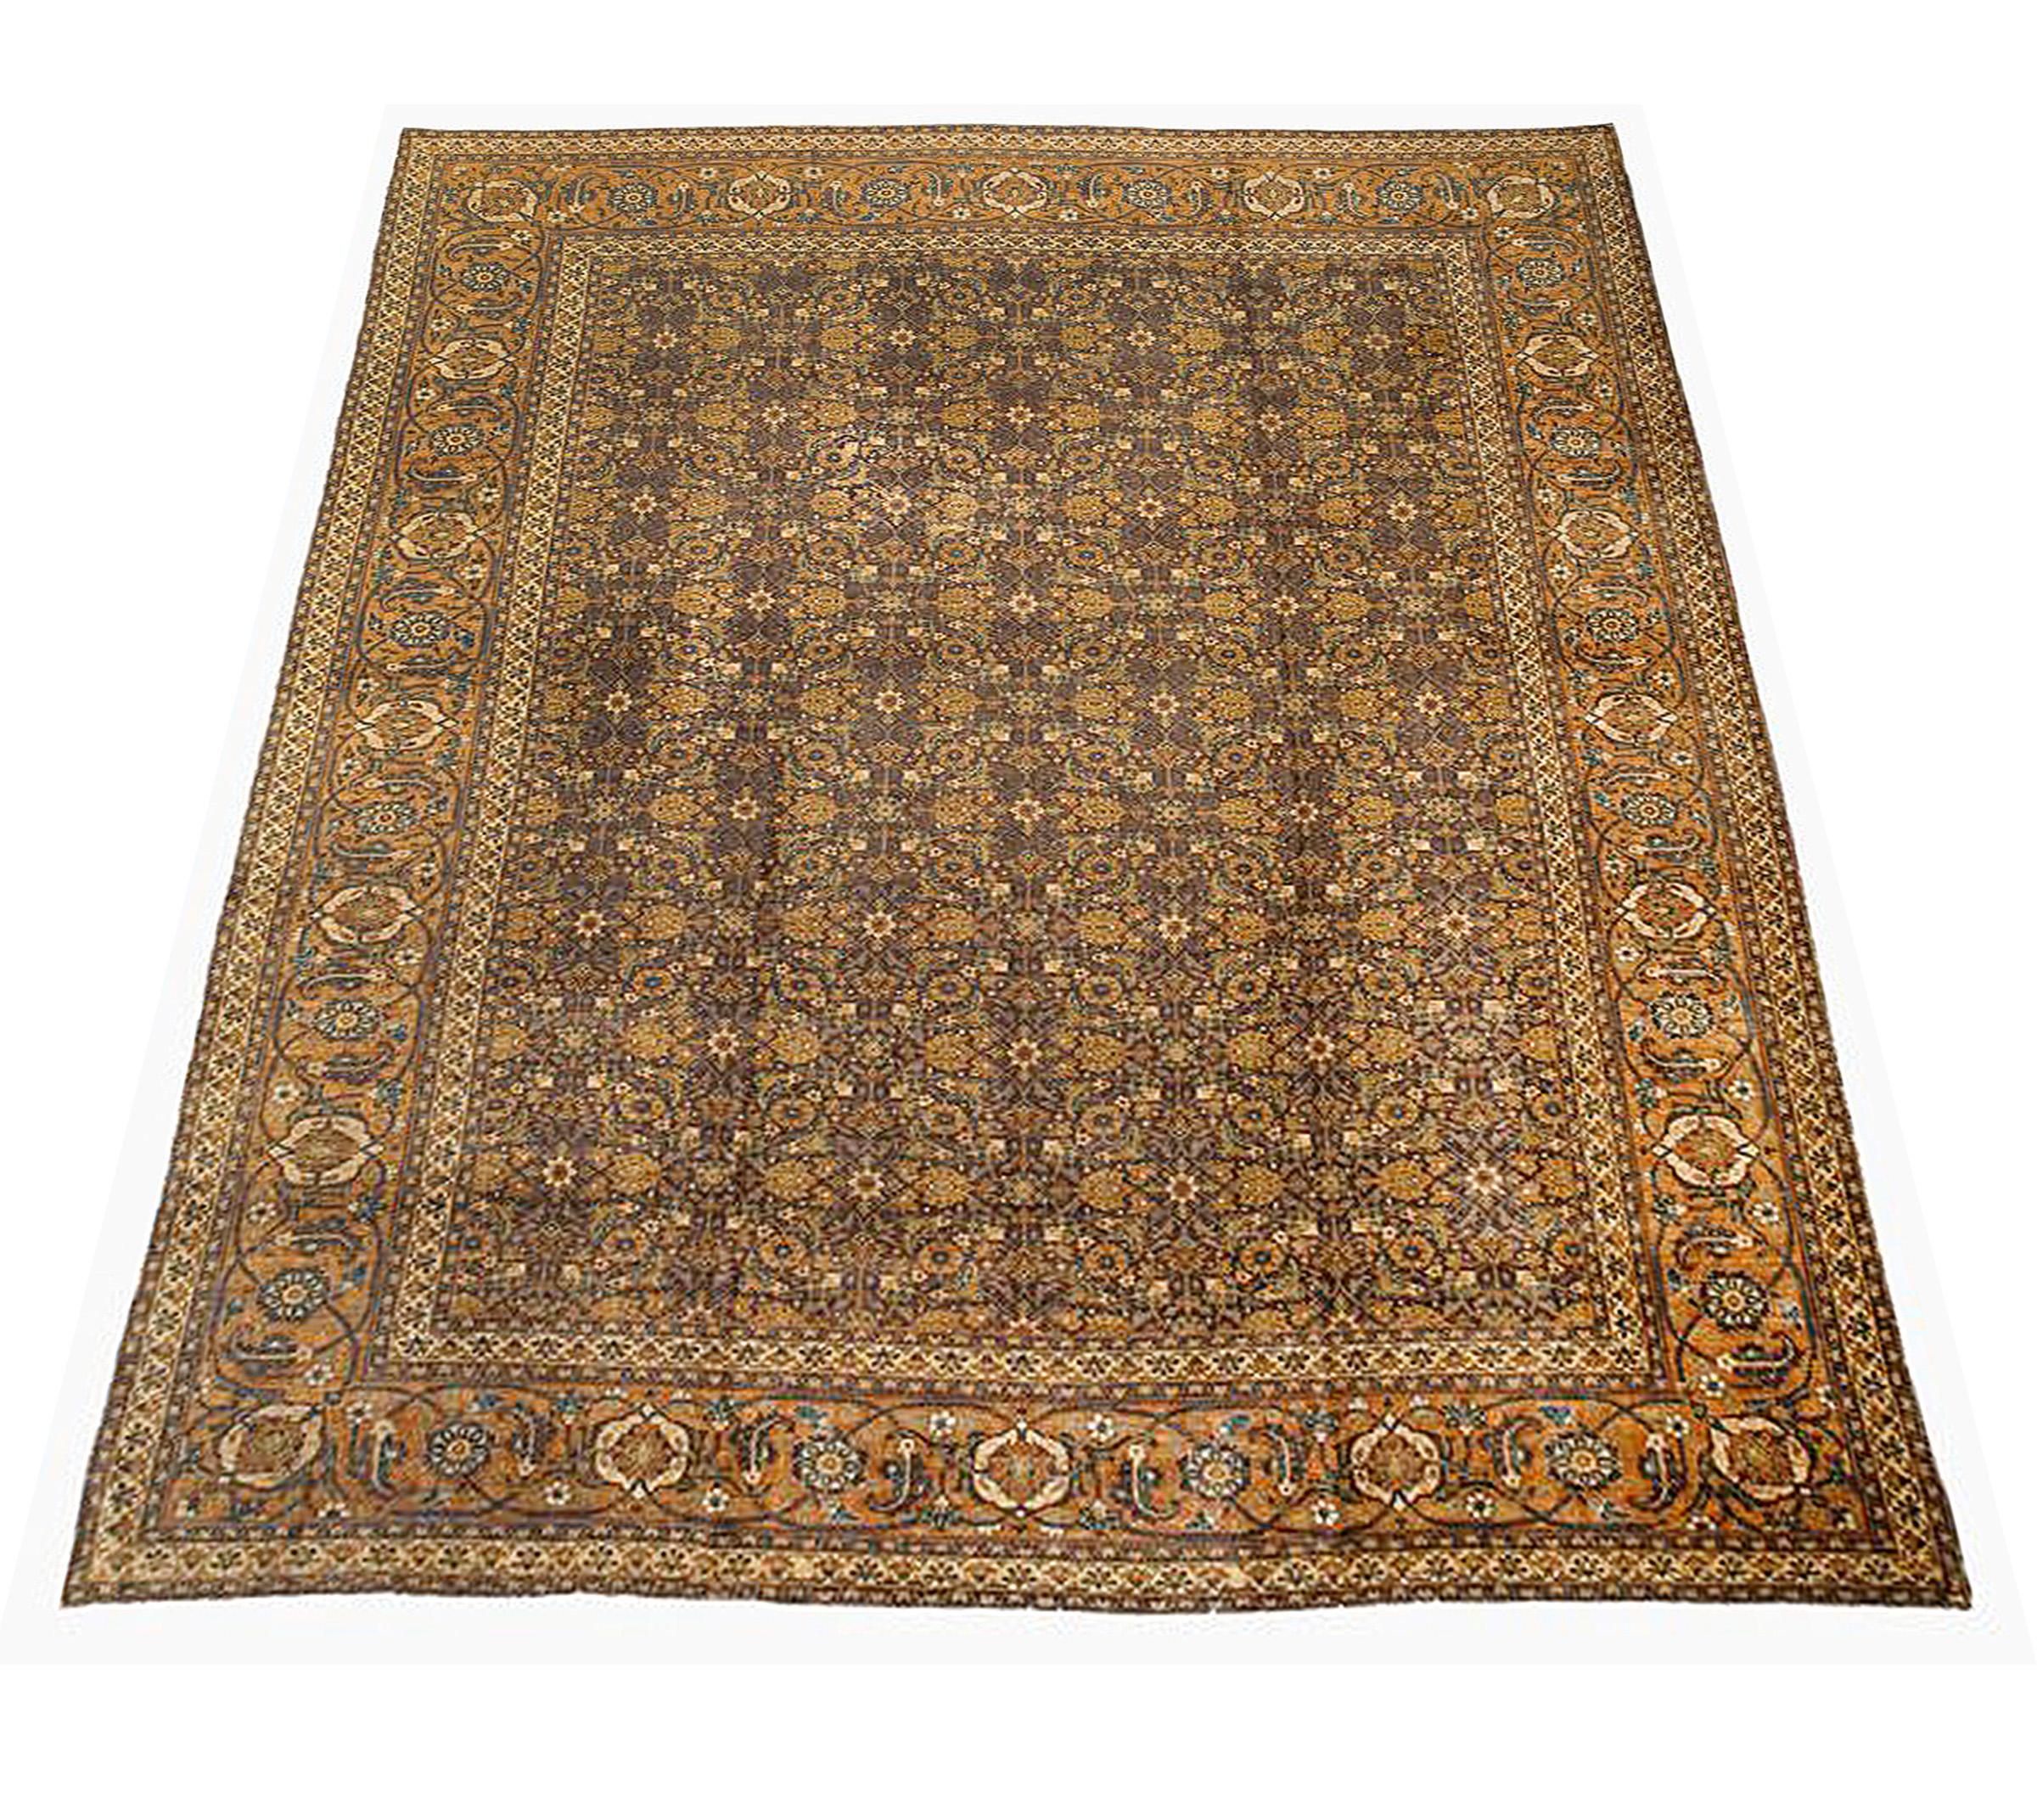 Contemporary Persian rug handwoven from the finest sheep’s wool and colored with all-natural vegetable dyes that are safe for humans and pets. It’s a traditional Tabriz weaving featuring a lovely ensemble of floral designs in beige and rust over a